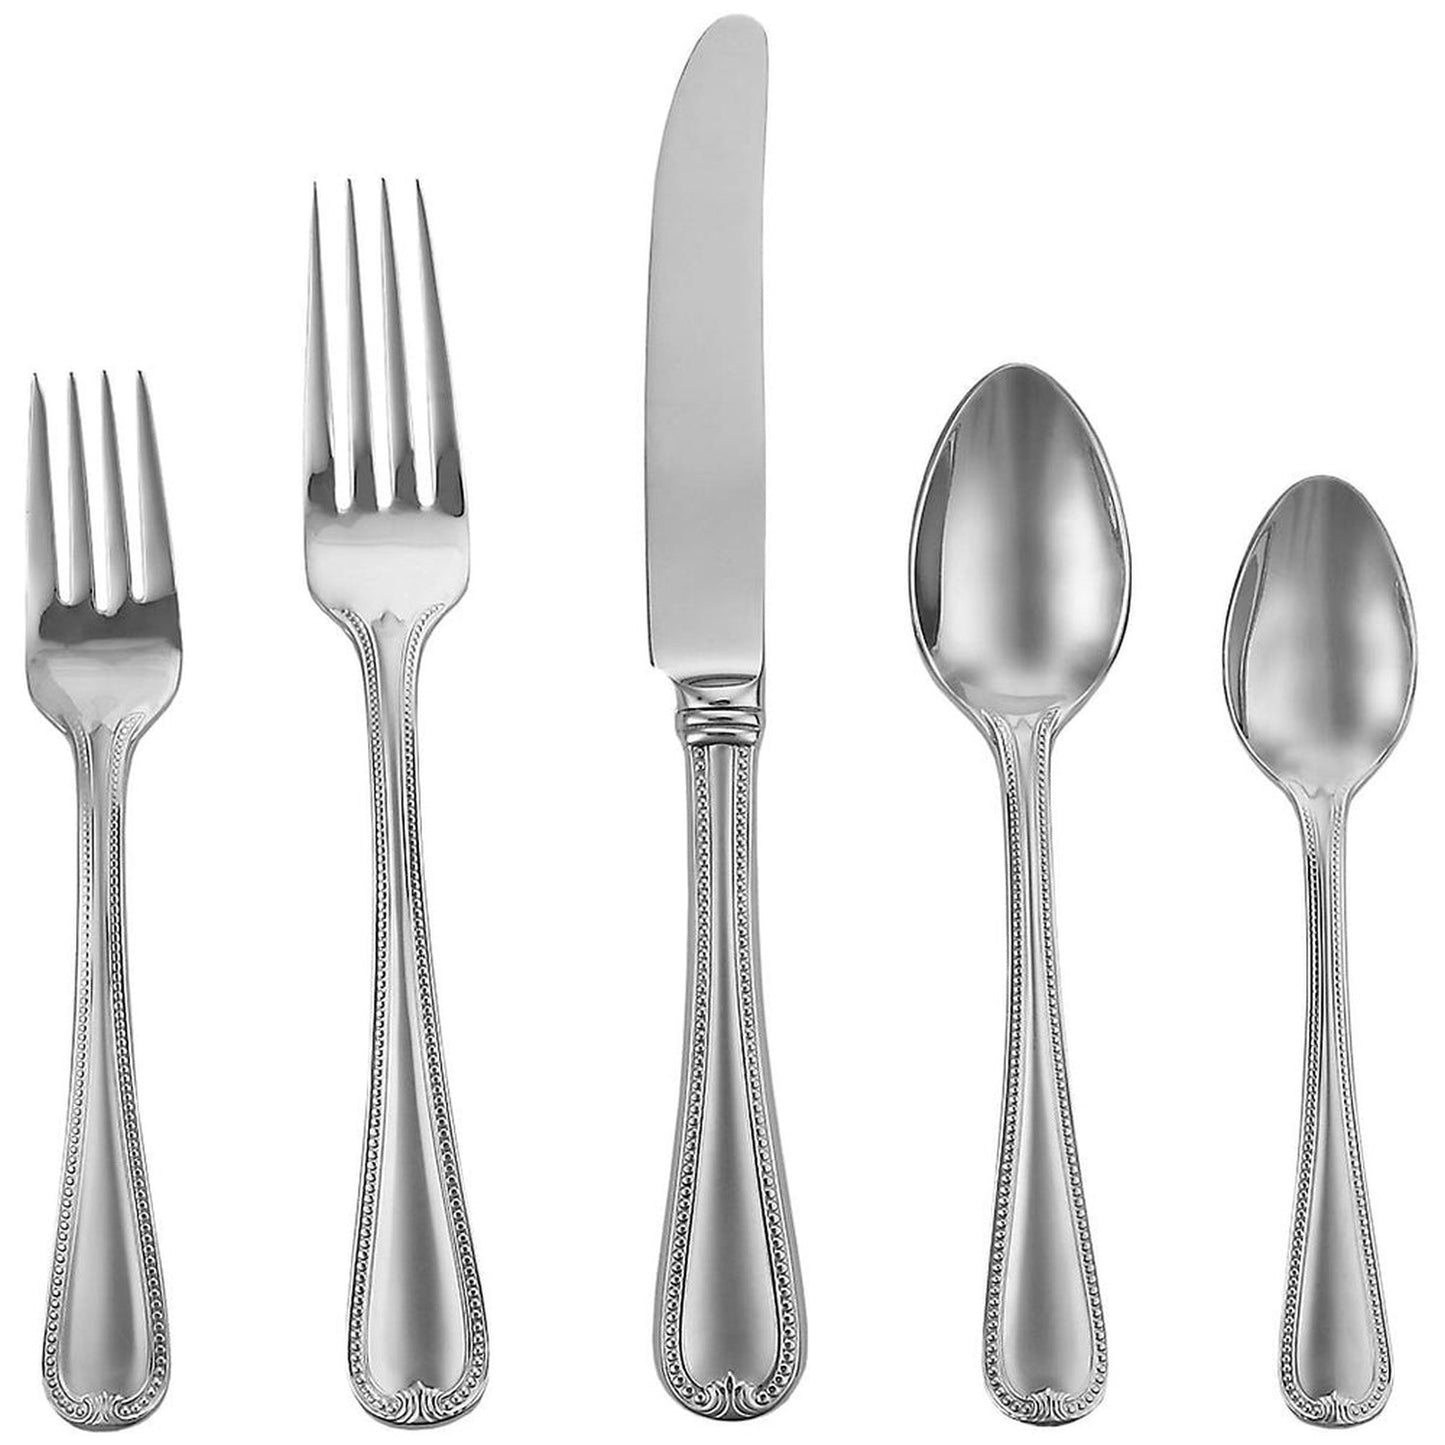 Lenox Vintage Jewel Frosted Flatware 5-Piece Place Setting.